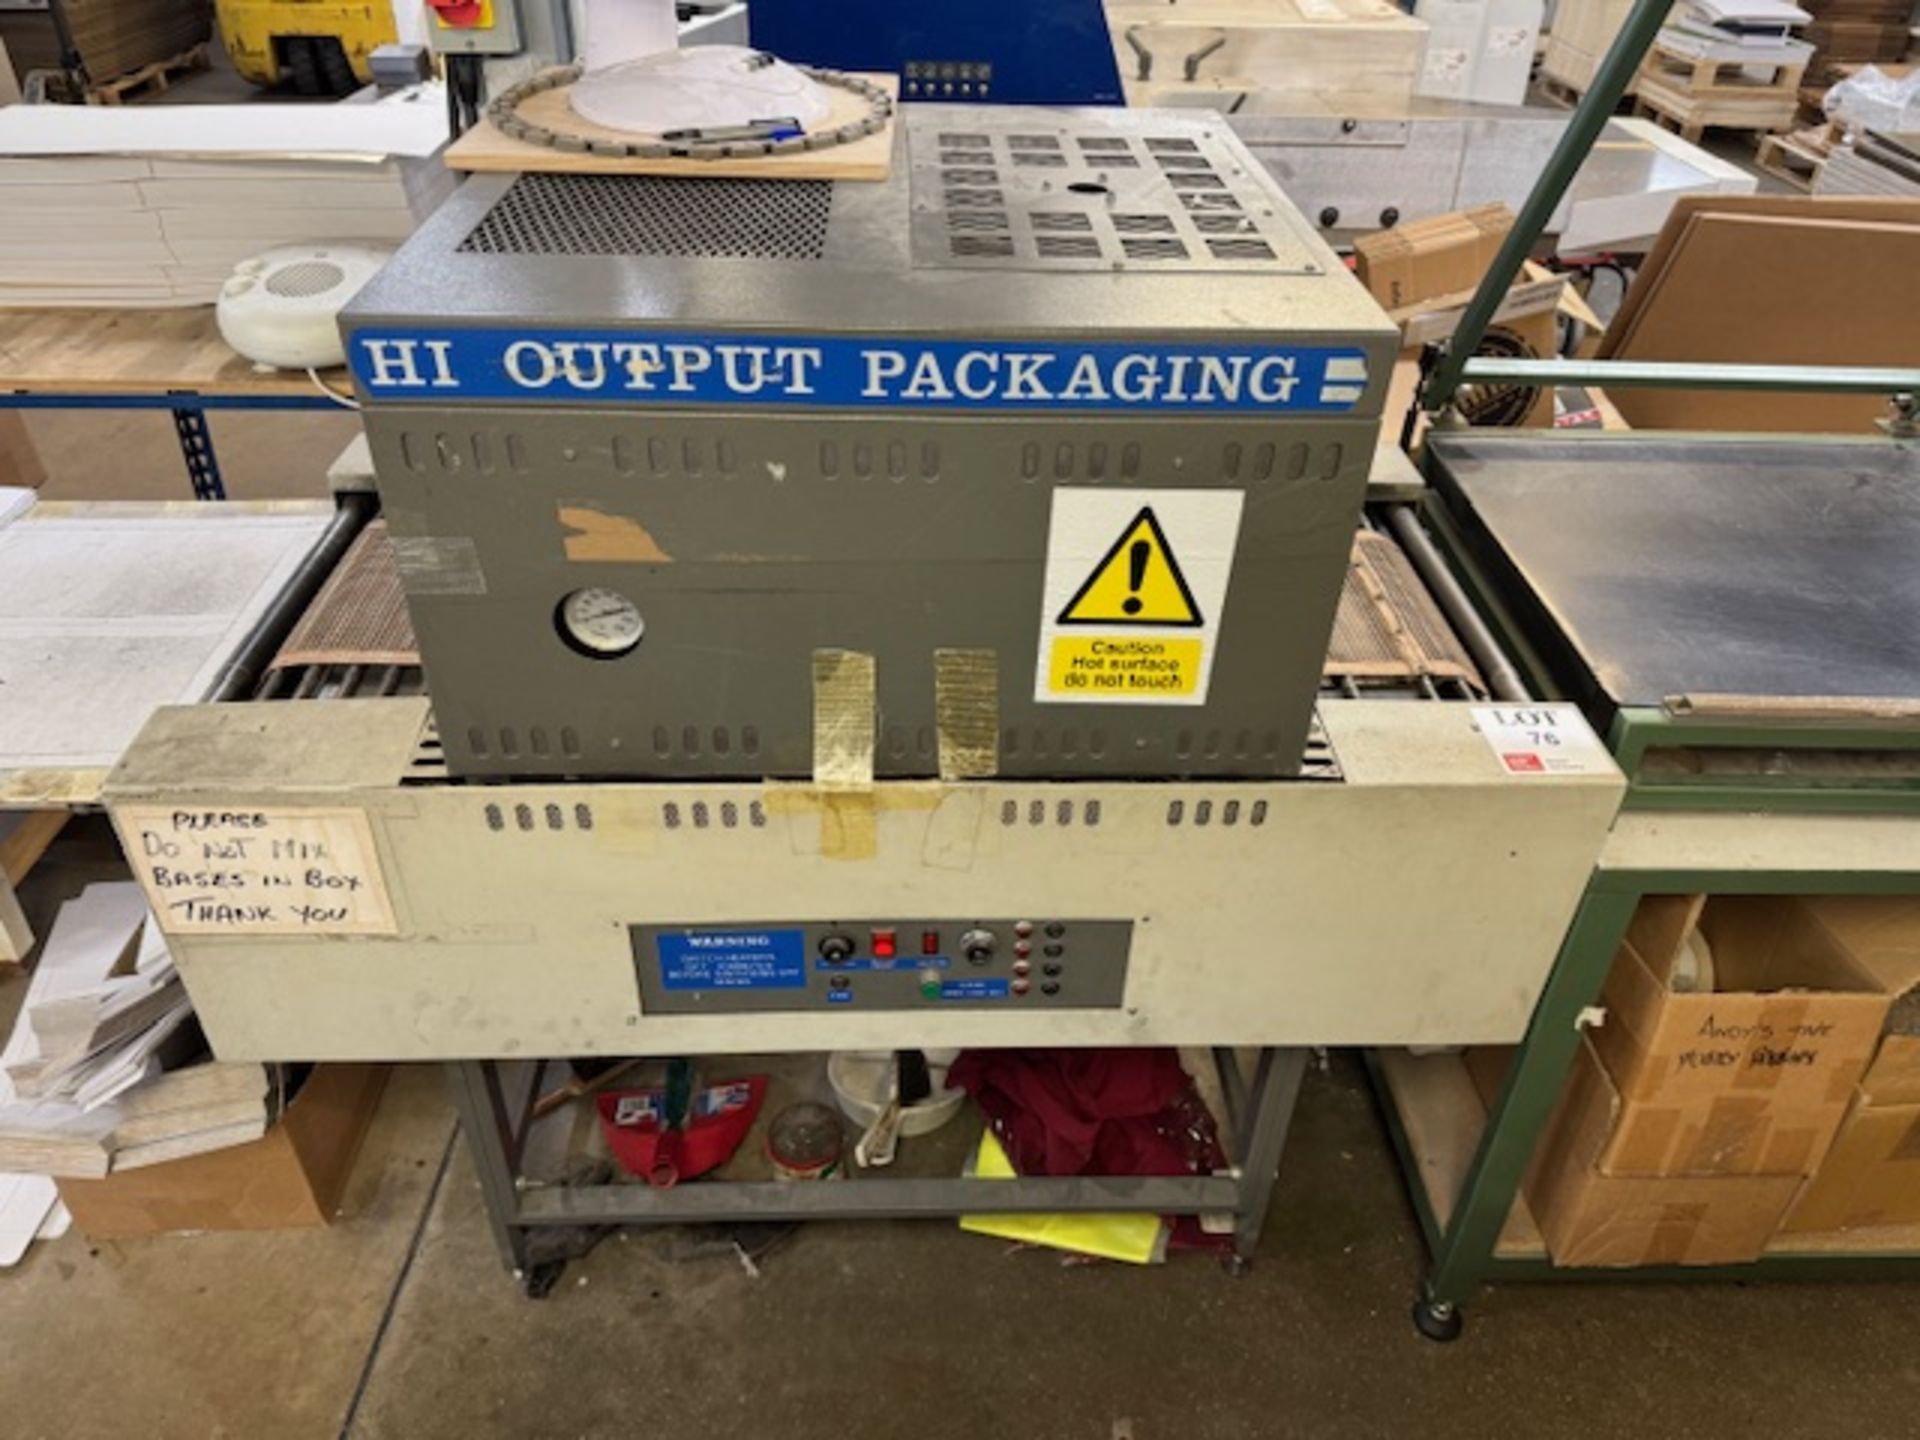 Hi output packaging heat sealing unit with L560/60B heat sealing and dispensing unit S/N LS2013 - Image 2 of 6